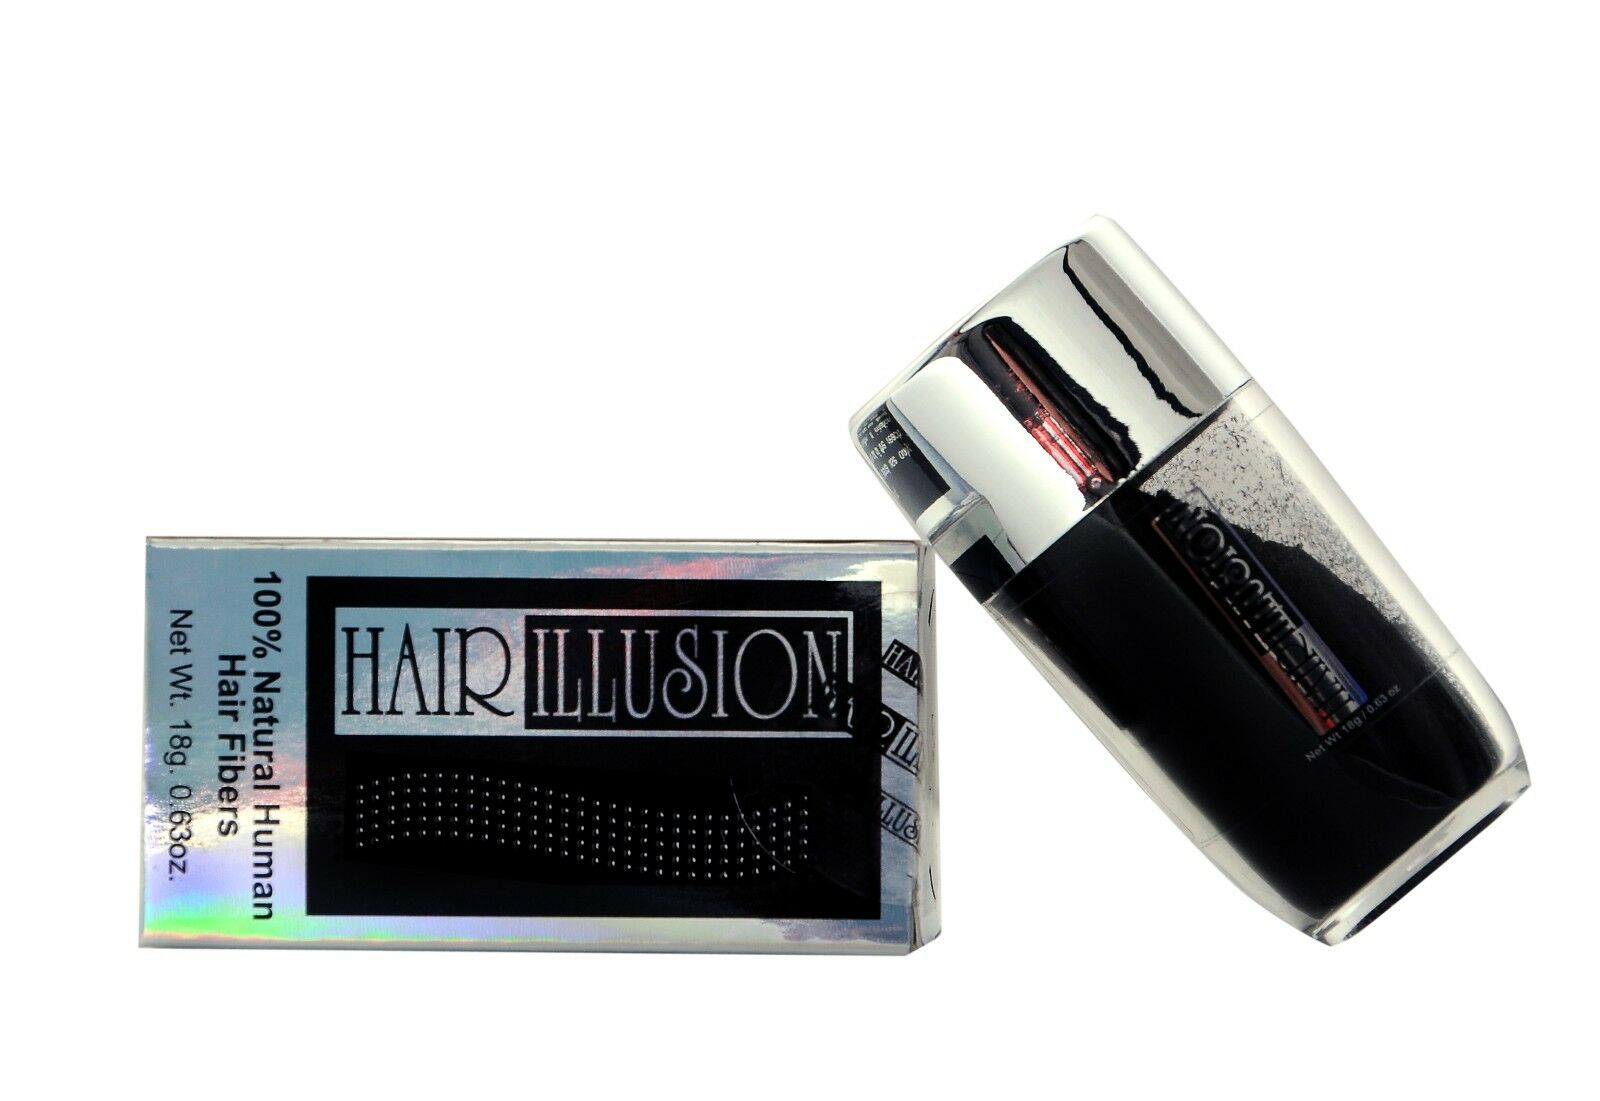 Hair Loss Hair Fibers & Bald Spot Cover Up Solutions by HAIR ILLUSION